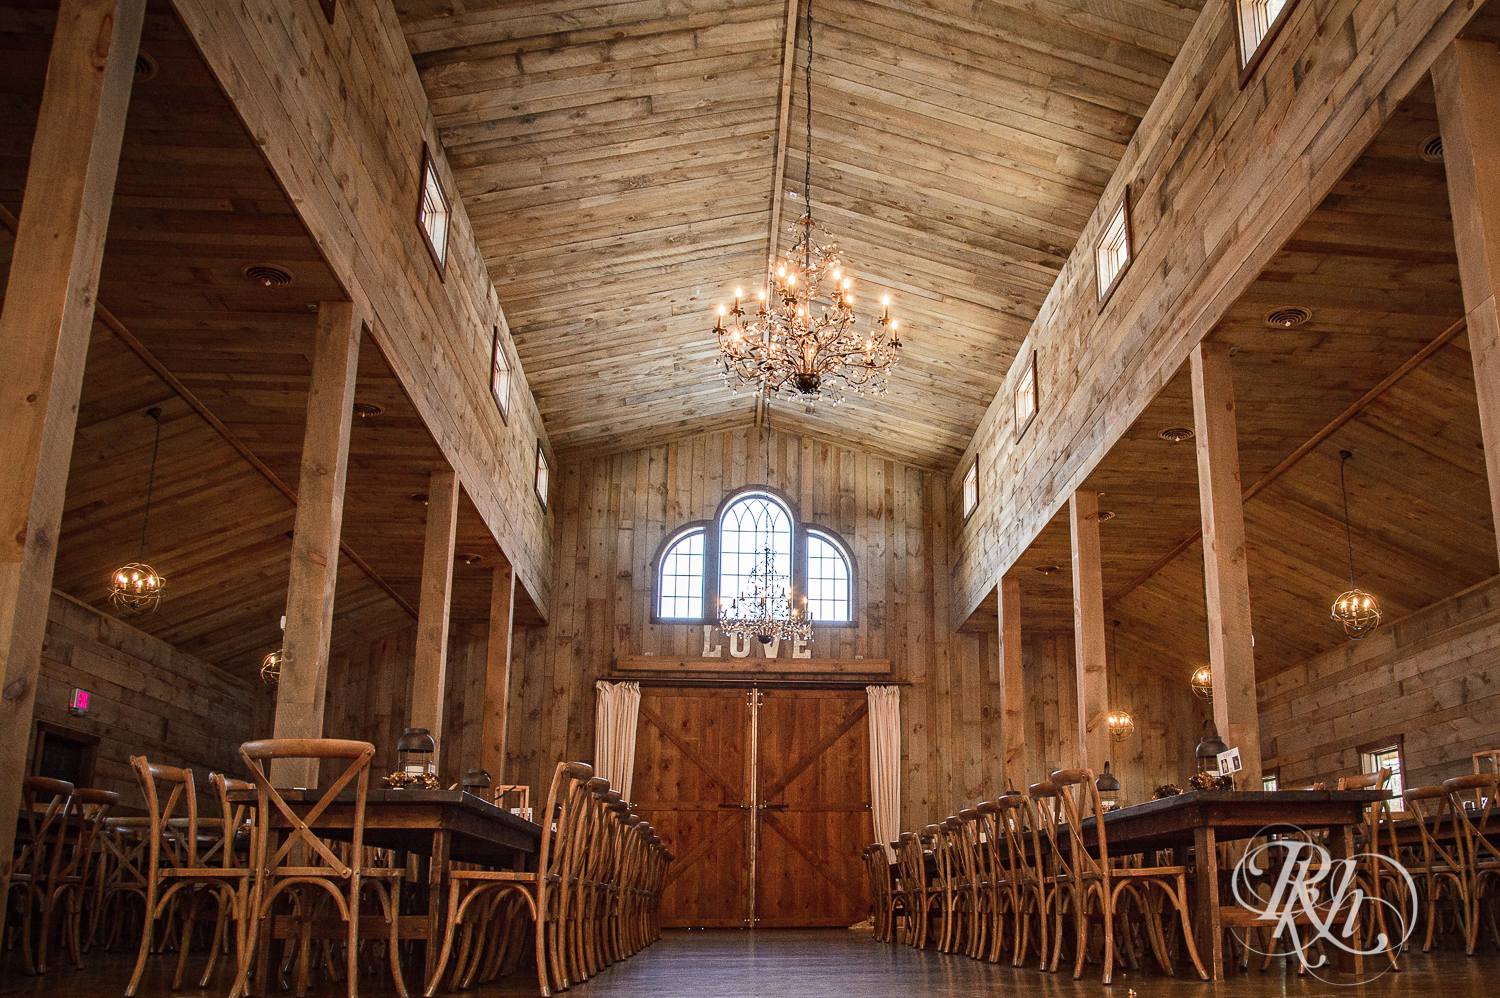 Indoor wedding ceremony and reception setup at Creekside Farm in Rush City, Minnesota.